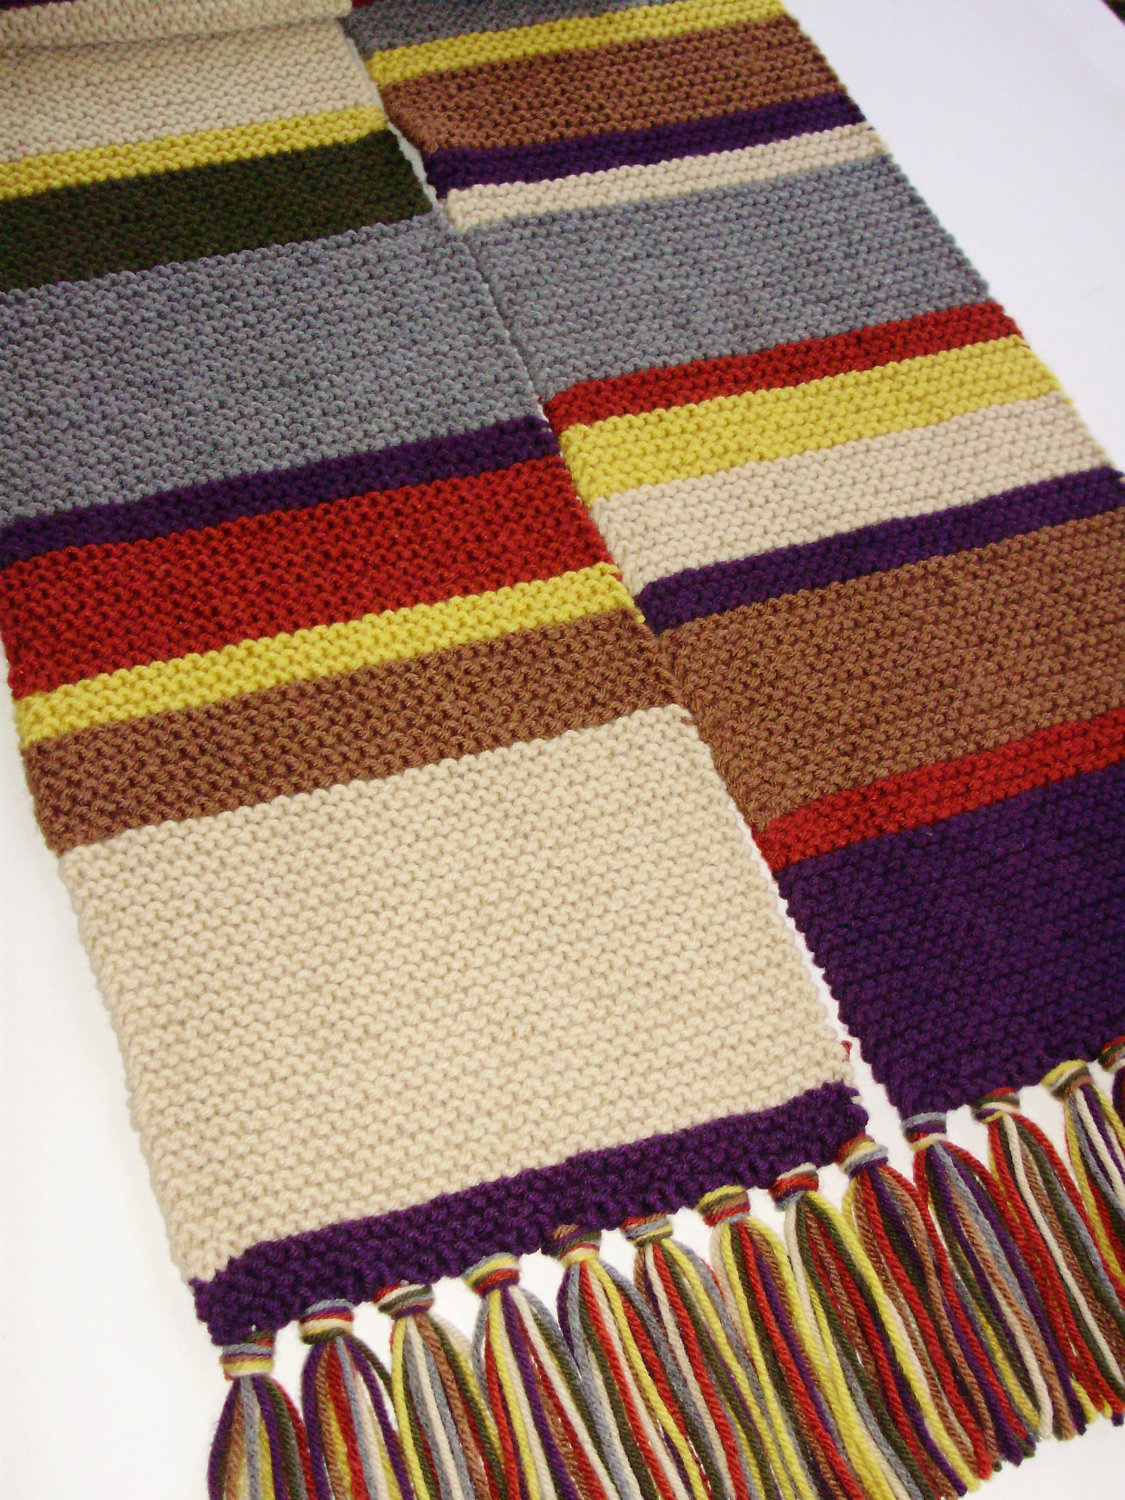 Dr Who Scarf Pattern Crochet 4 Doctor Who Scarf Knitting Pattern The Funky Stitch